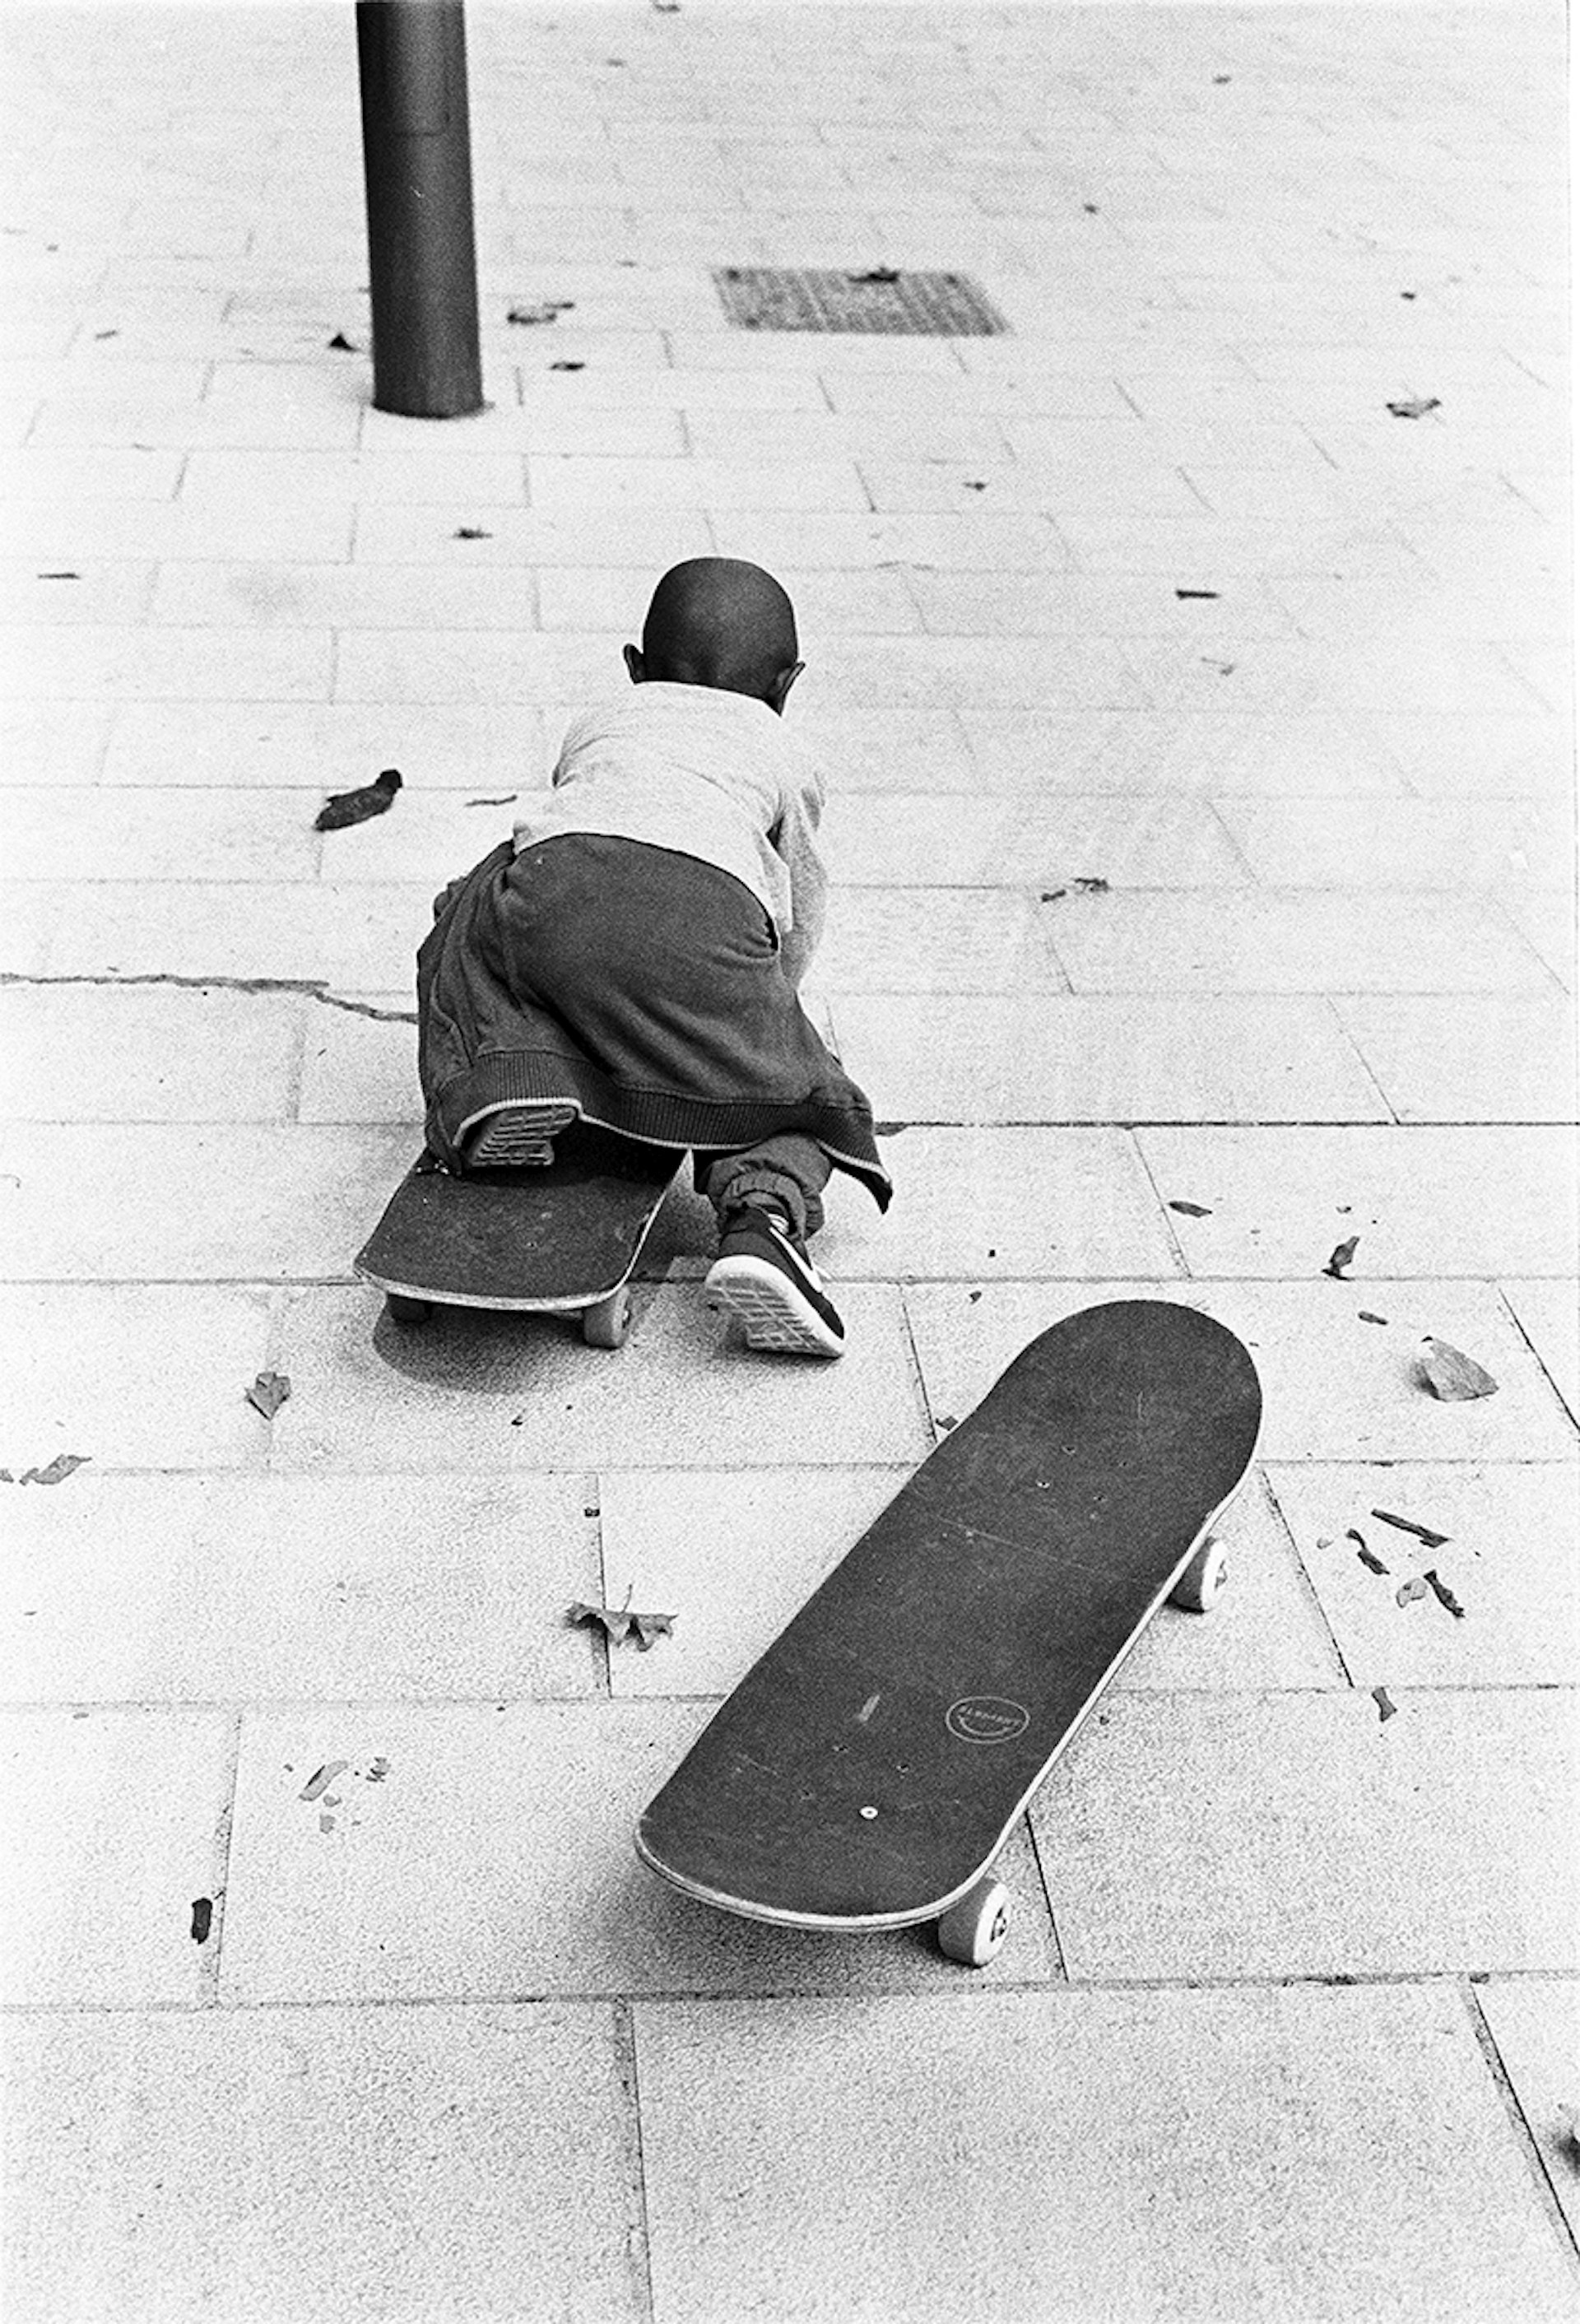 A young boy lies on a skateboard and pushes themself along